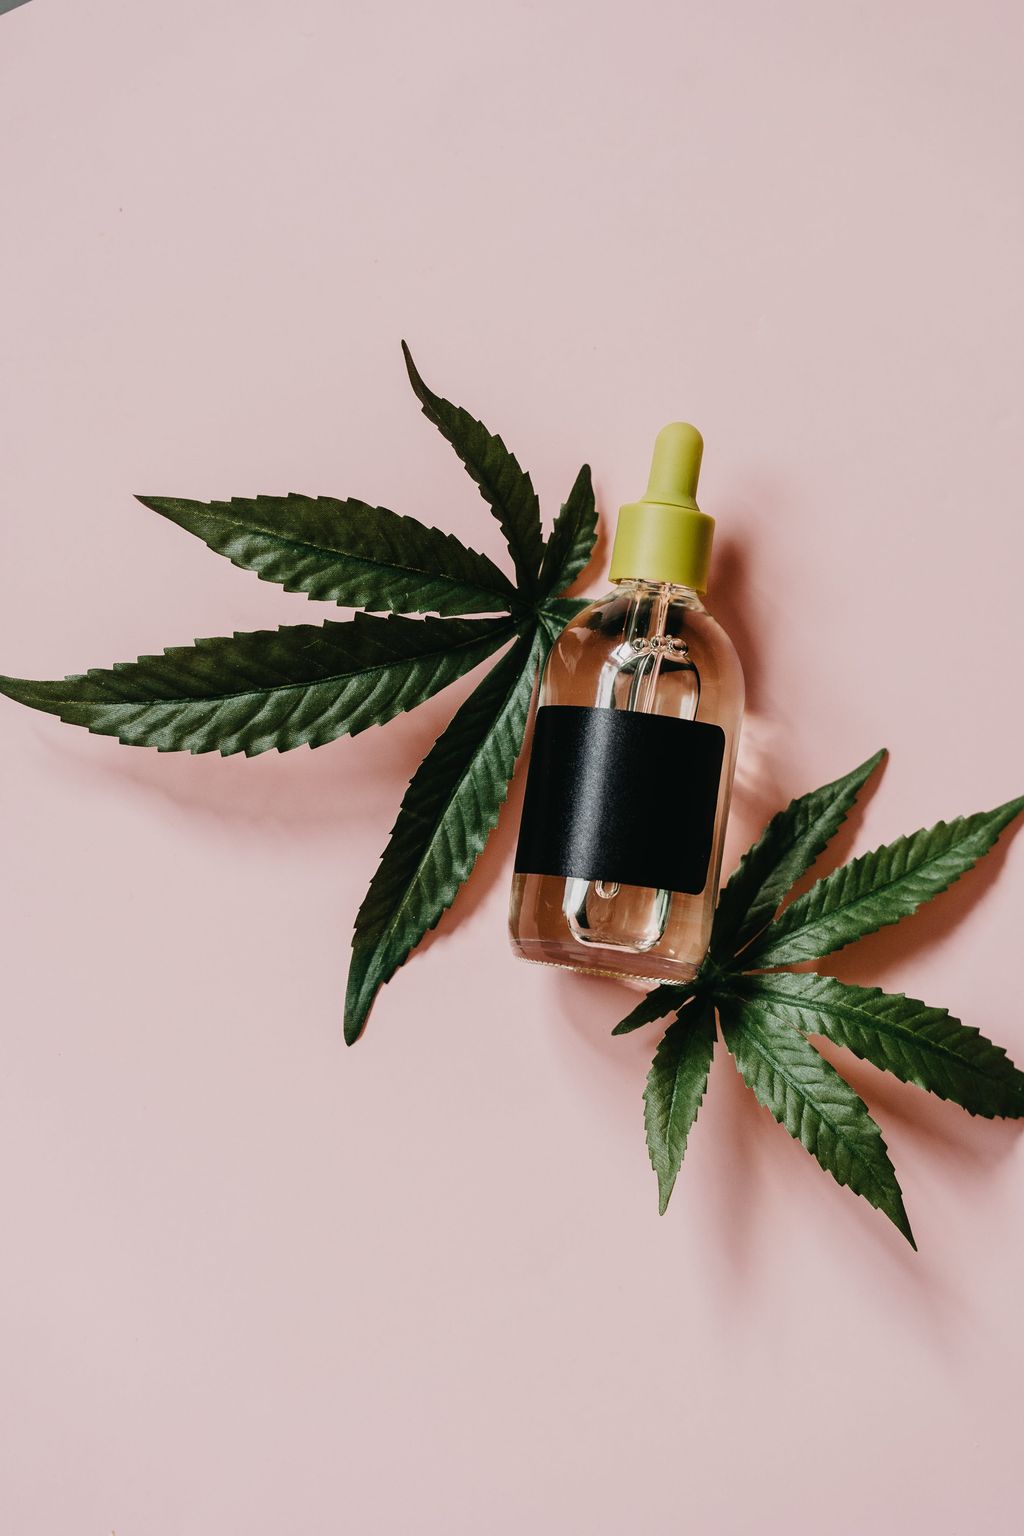 CBD Oil Businesses: Payment Processing Merchants to Consider